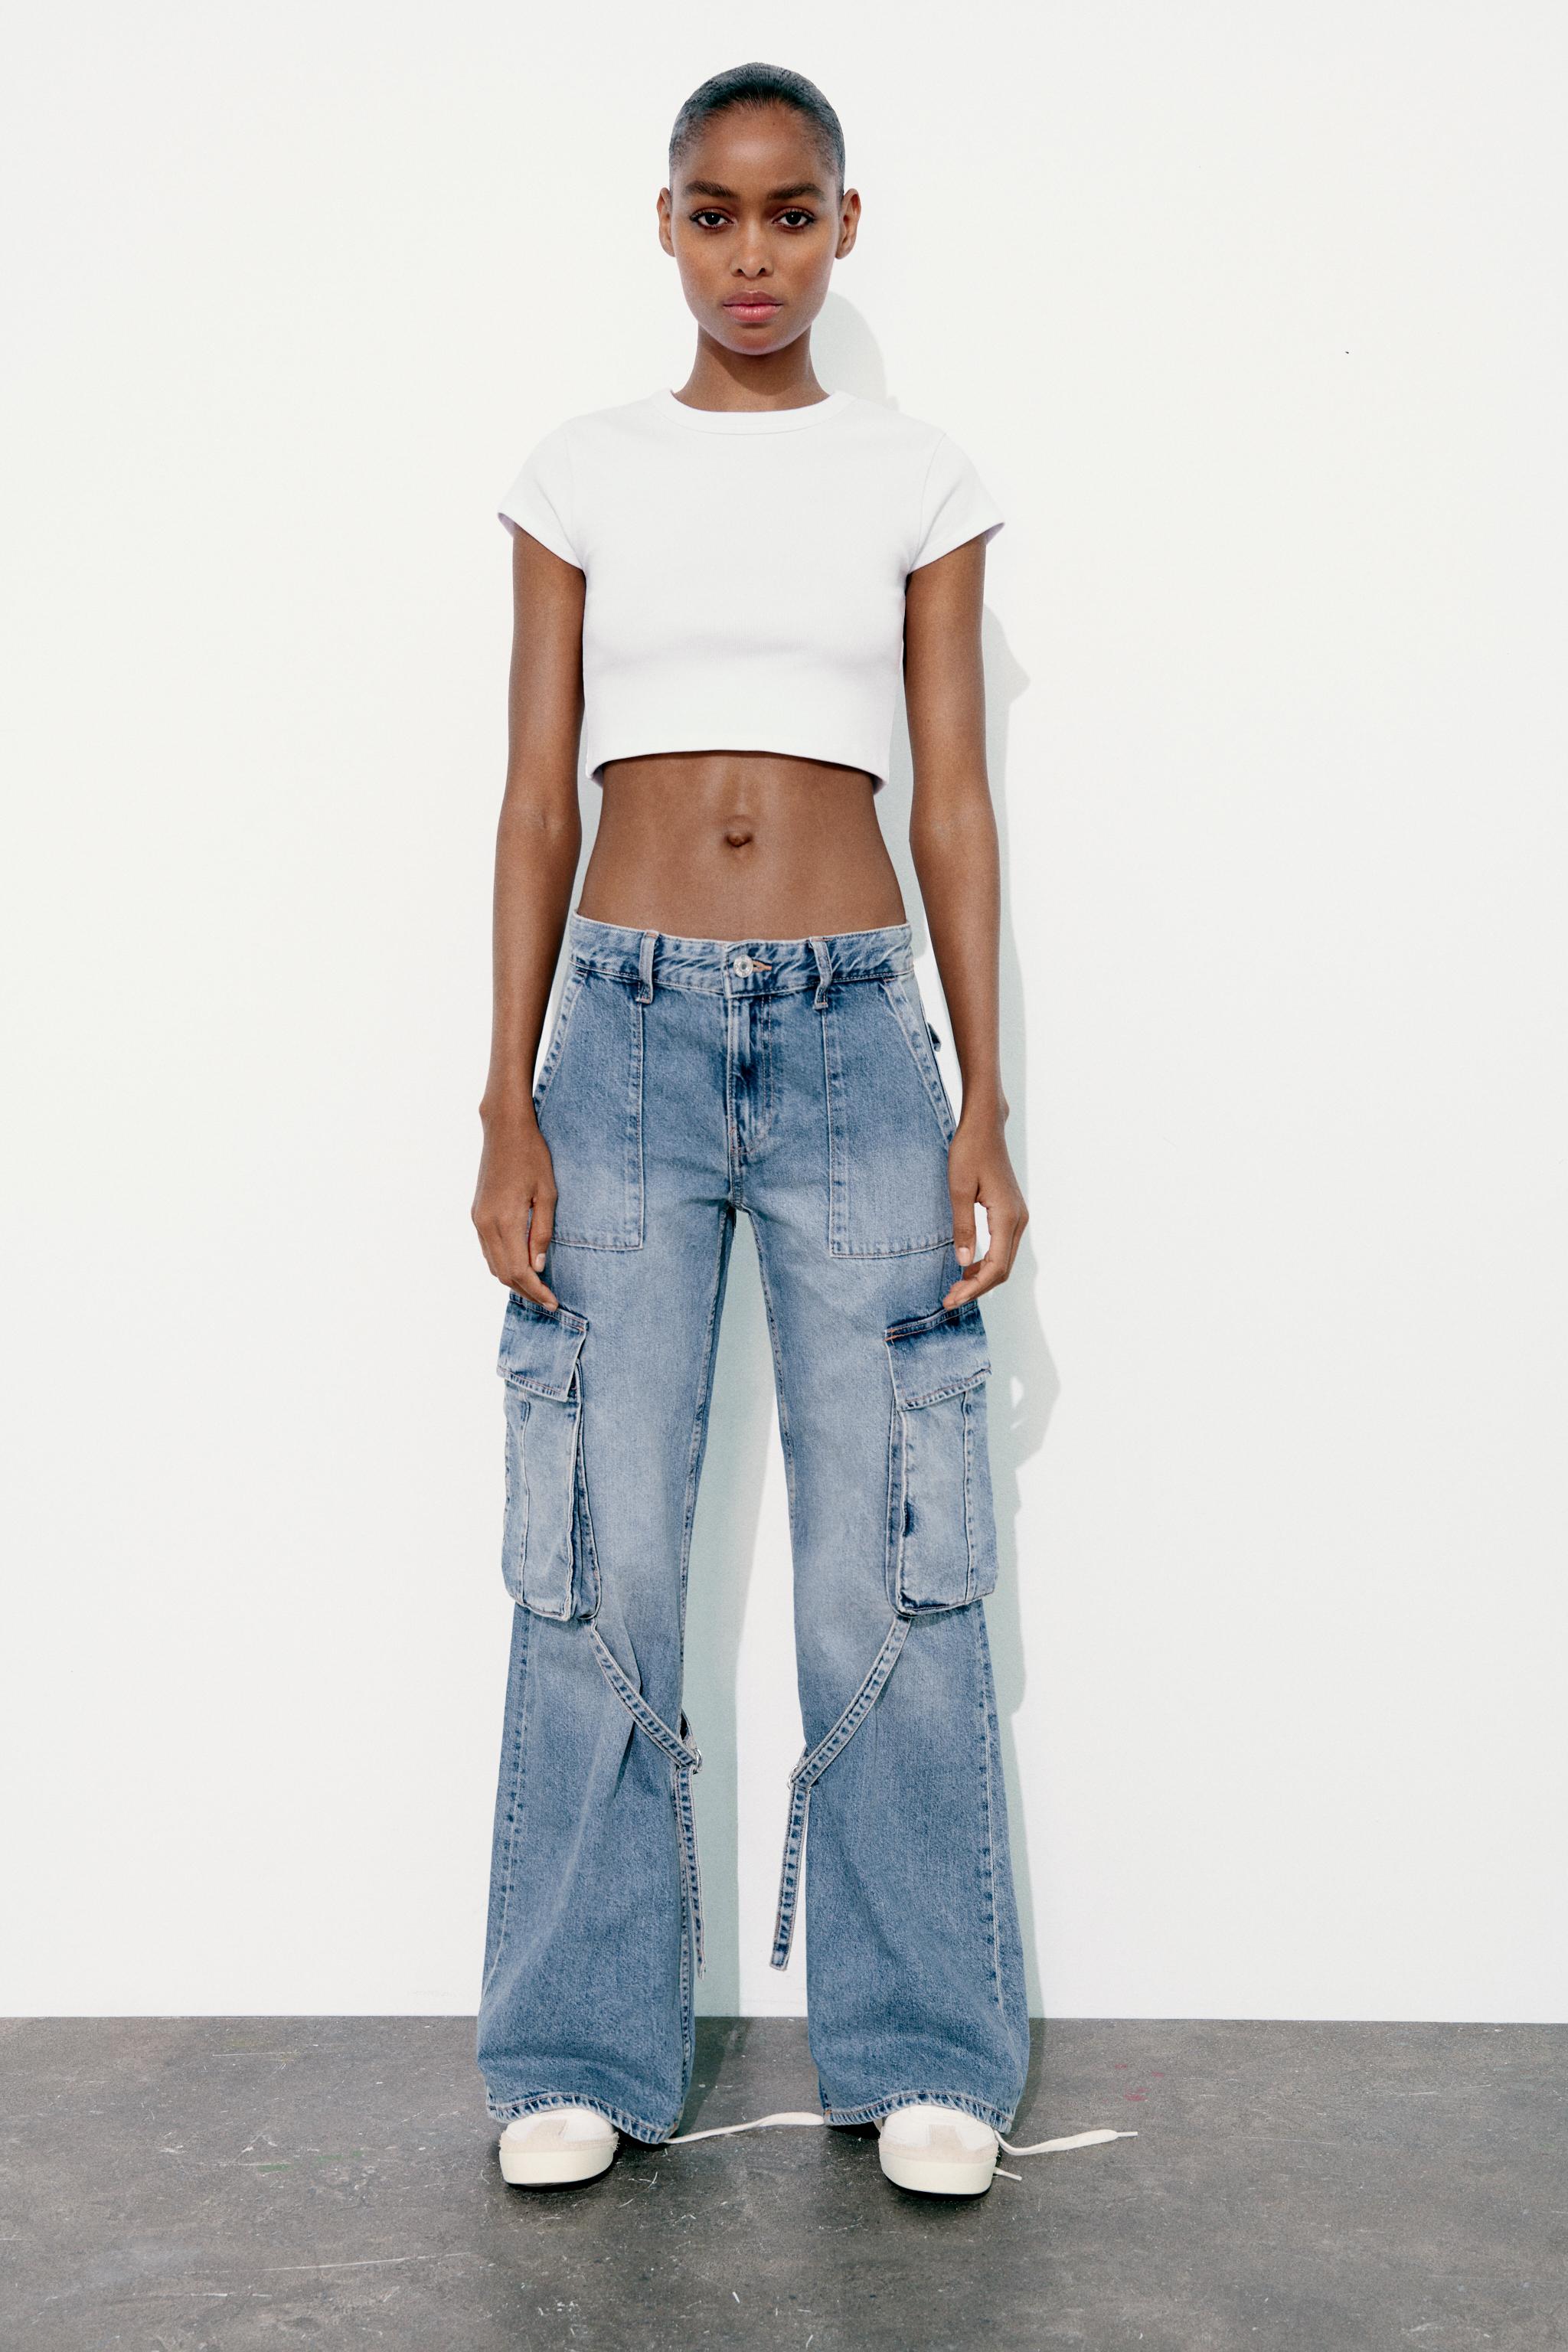 MID-RISE TRF CARGO JEANS - Blue | ZARA United States